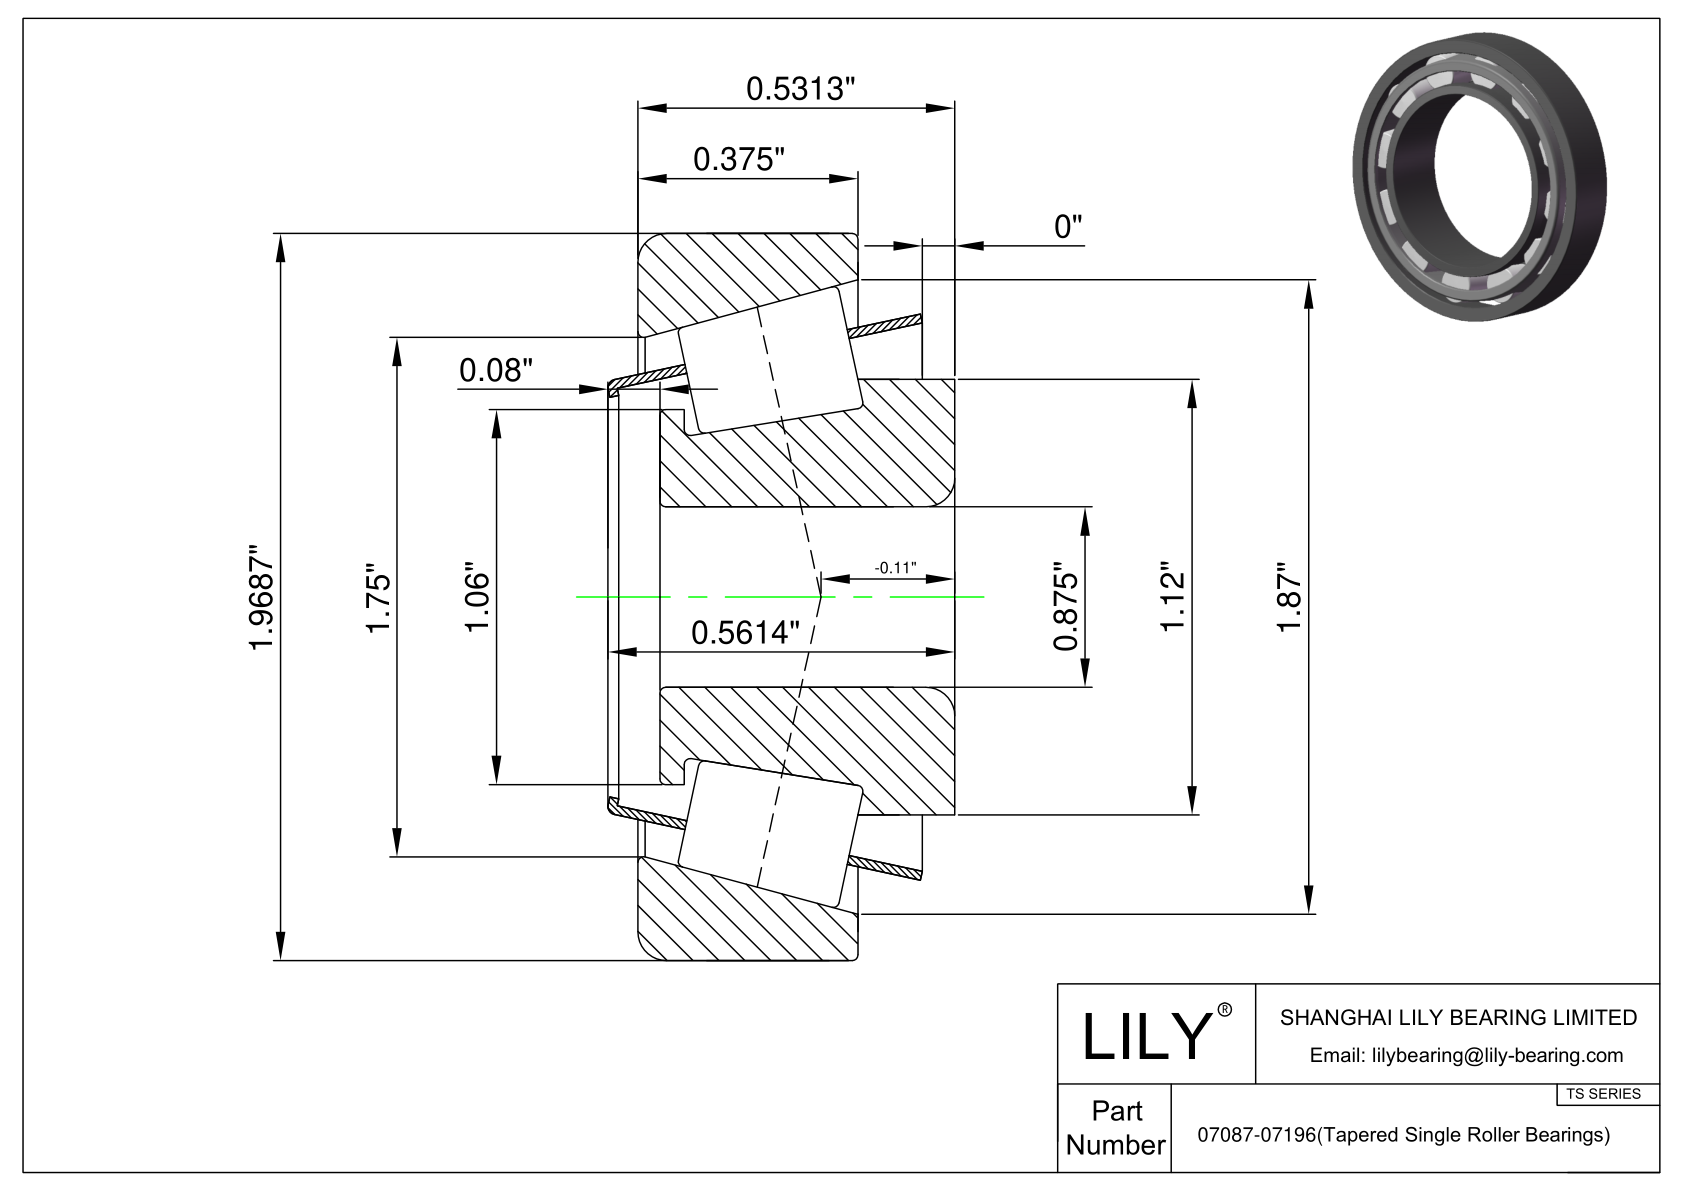 07087-07196 TS (Tapered Single Roller Bearings) (Imperial) cad drawing